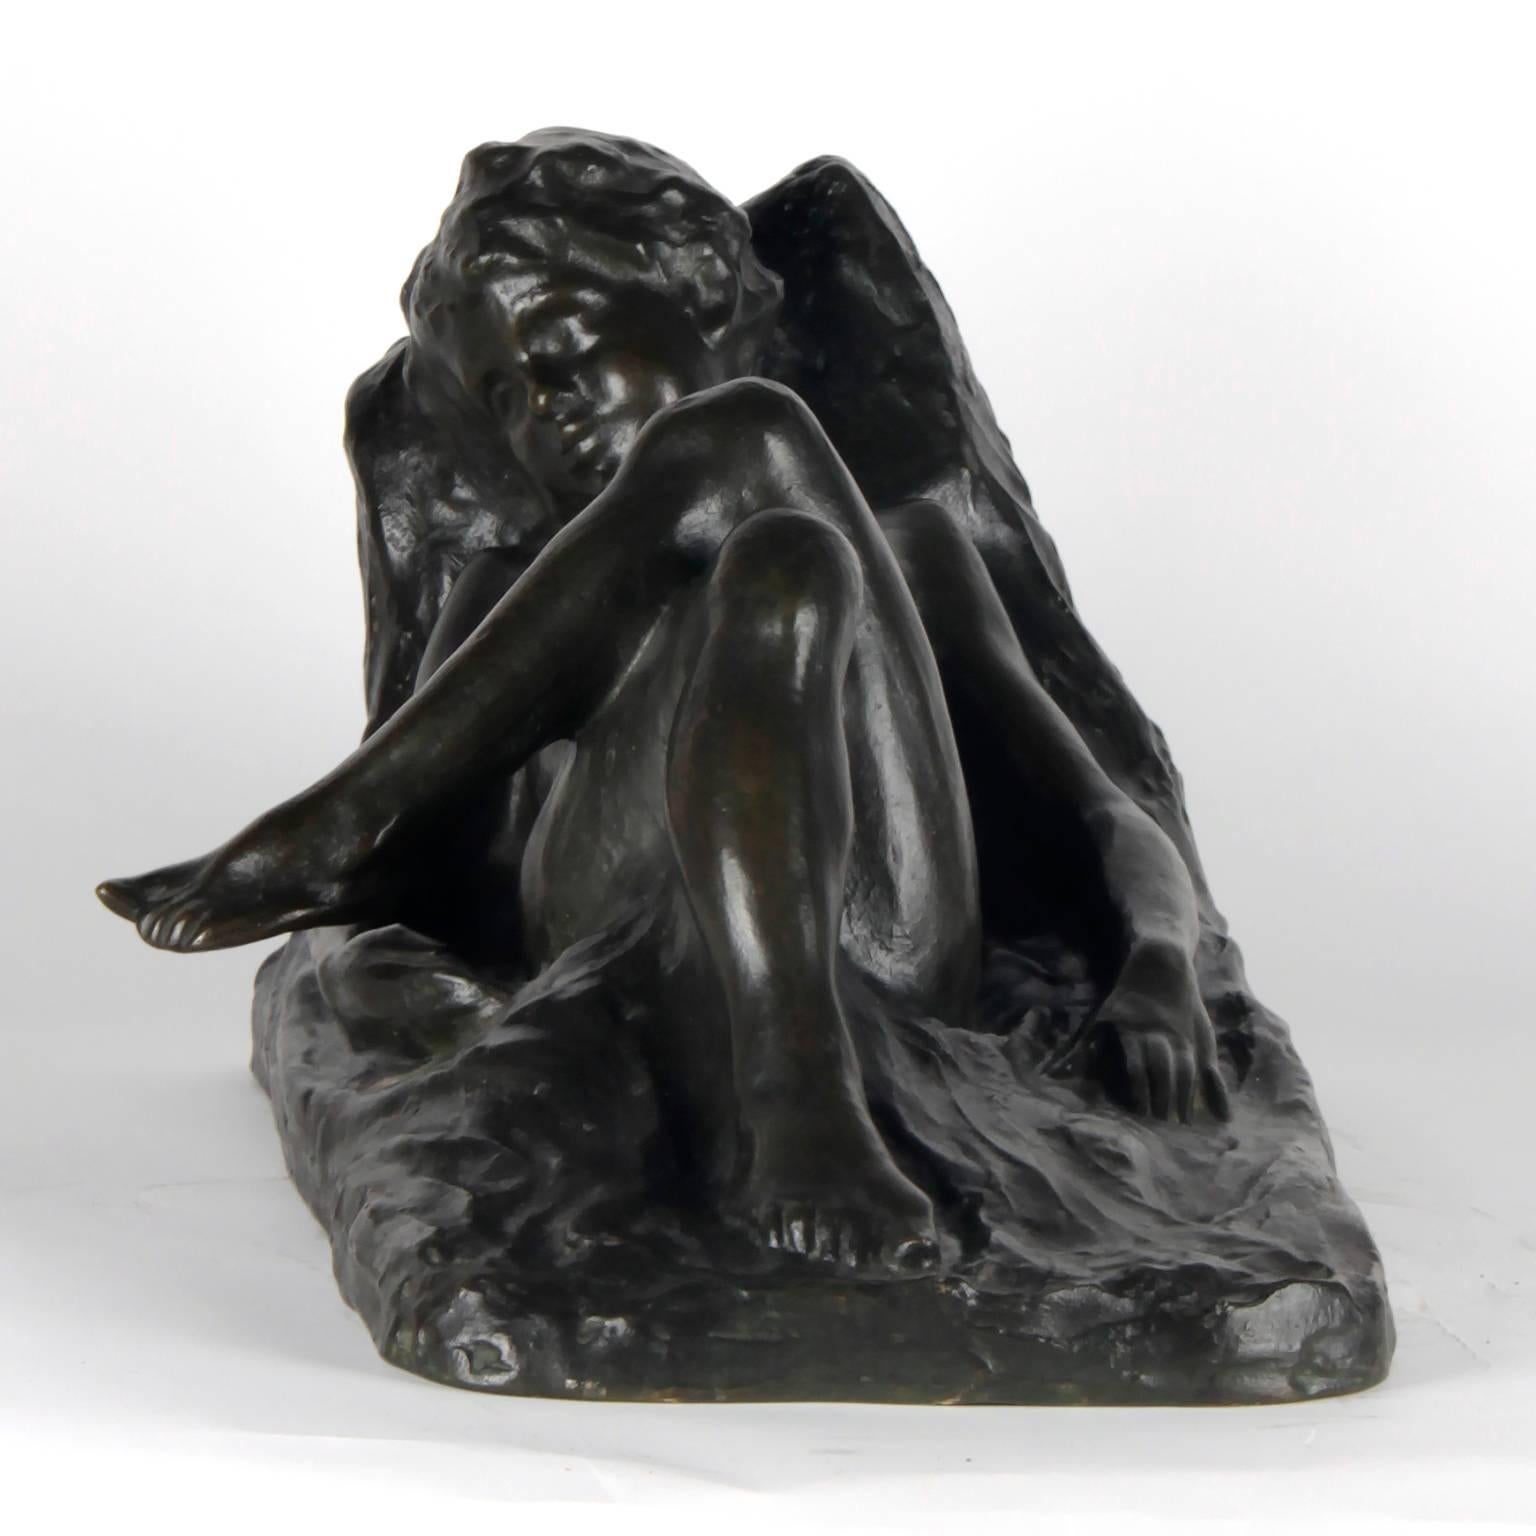 20th century bronze sculpture depicting a lying boy, signed by Eug Canneel.
Canneel was born in 1882 (Bruxelles) and died in 1966 (Schaarbeek)
Canneel was a son of a big artist family. His grandfather was the famous painter Theodore Joseph